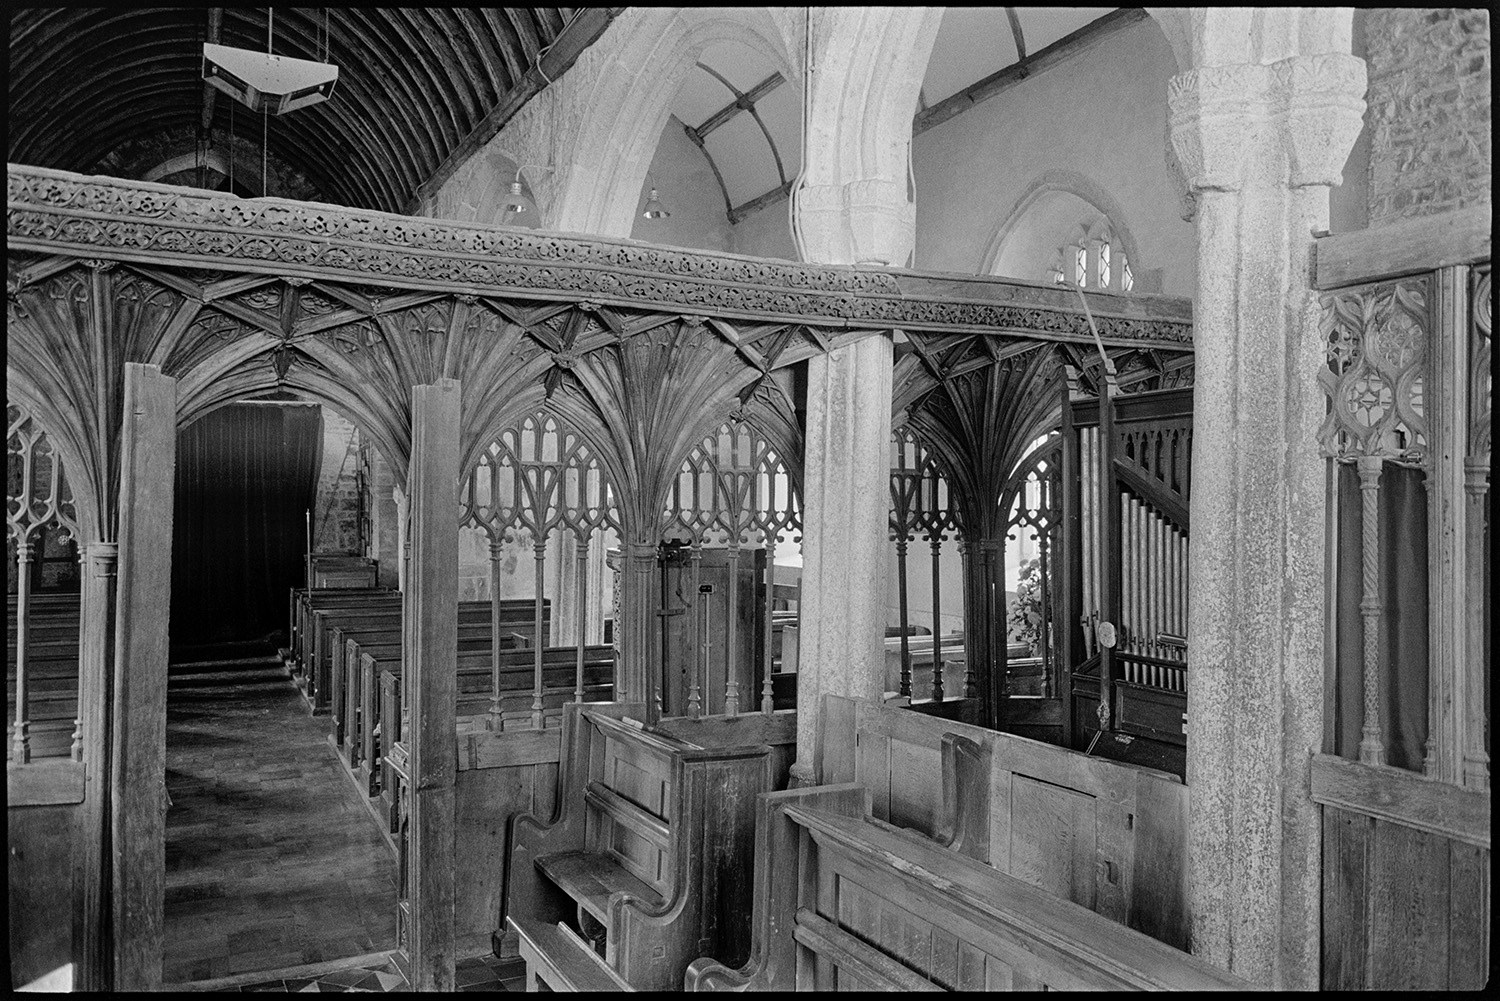 Church interior, tomb, screen.
[The interior of Coldridge church, showing a carved rood screen, wooden pews, an organ and a pulpit.]